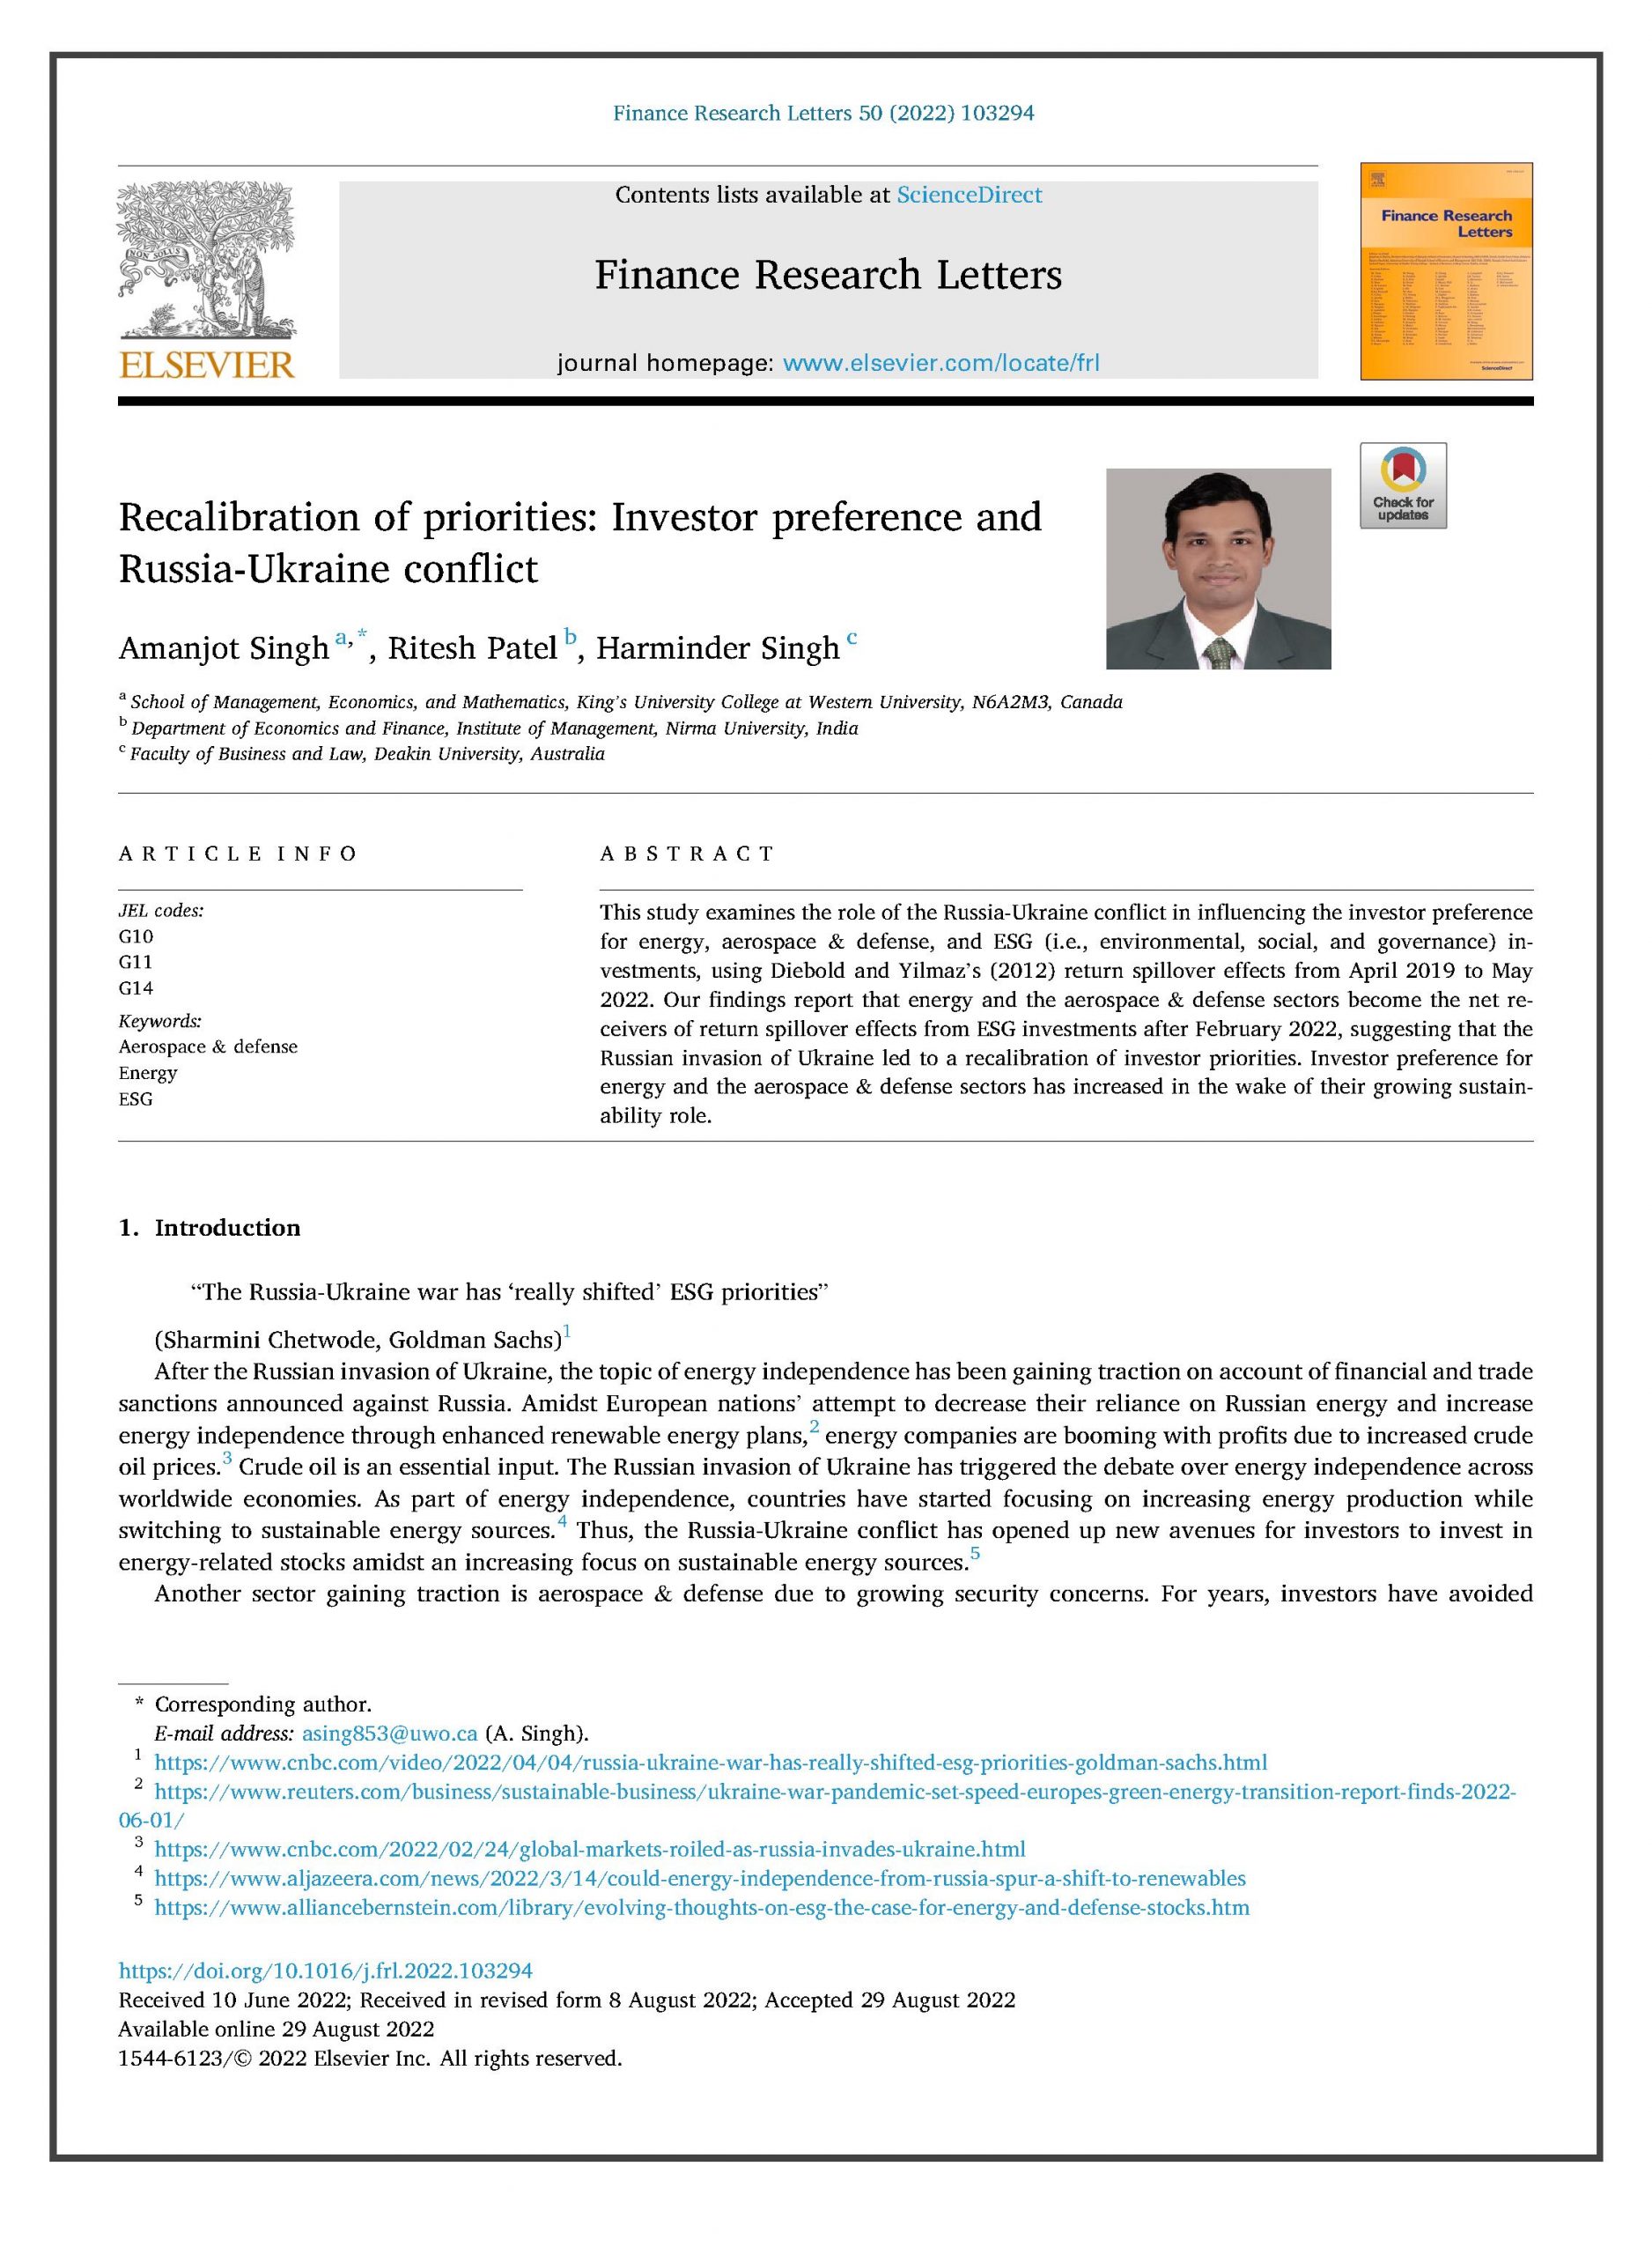 Recalibration of Priorities: Investor Preference and Russia-Ukraine Conflict